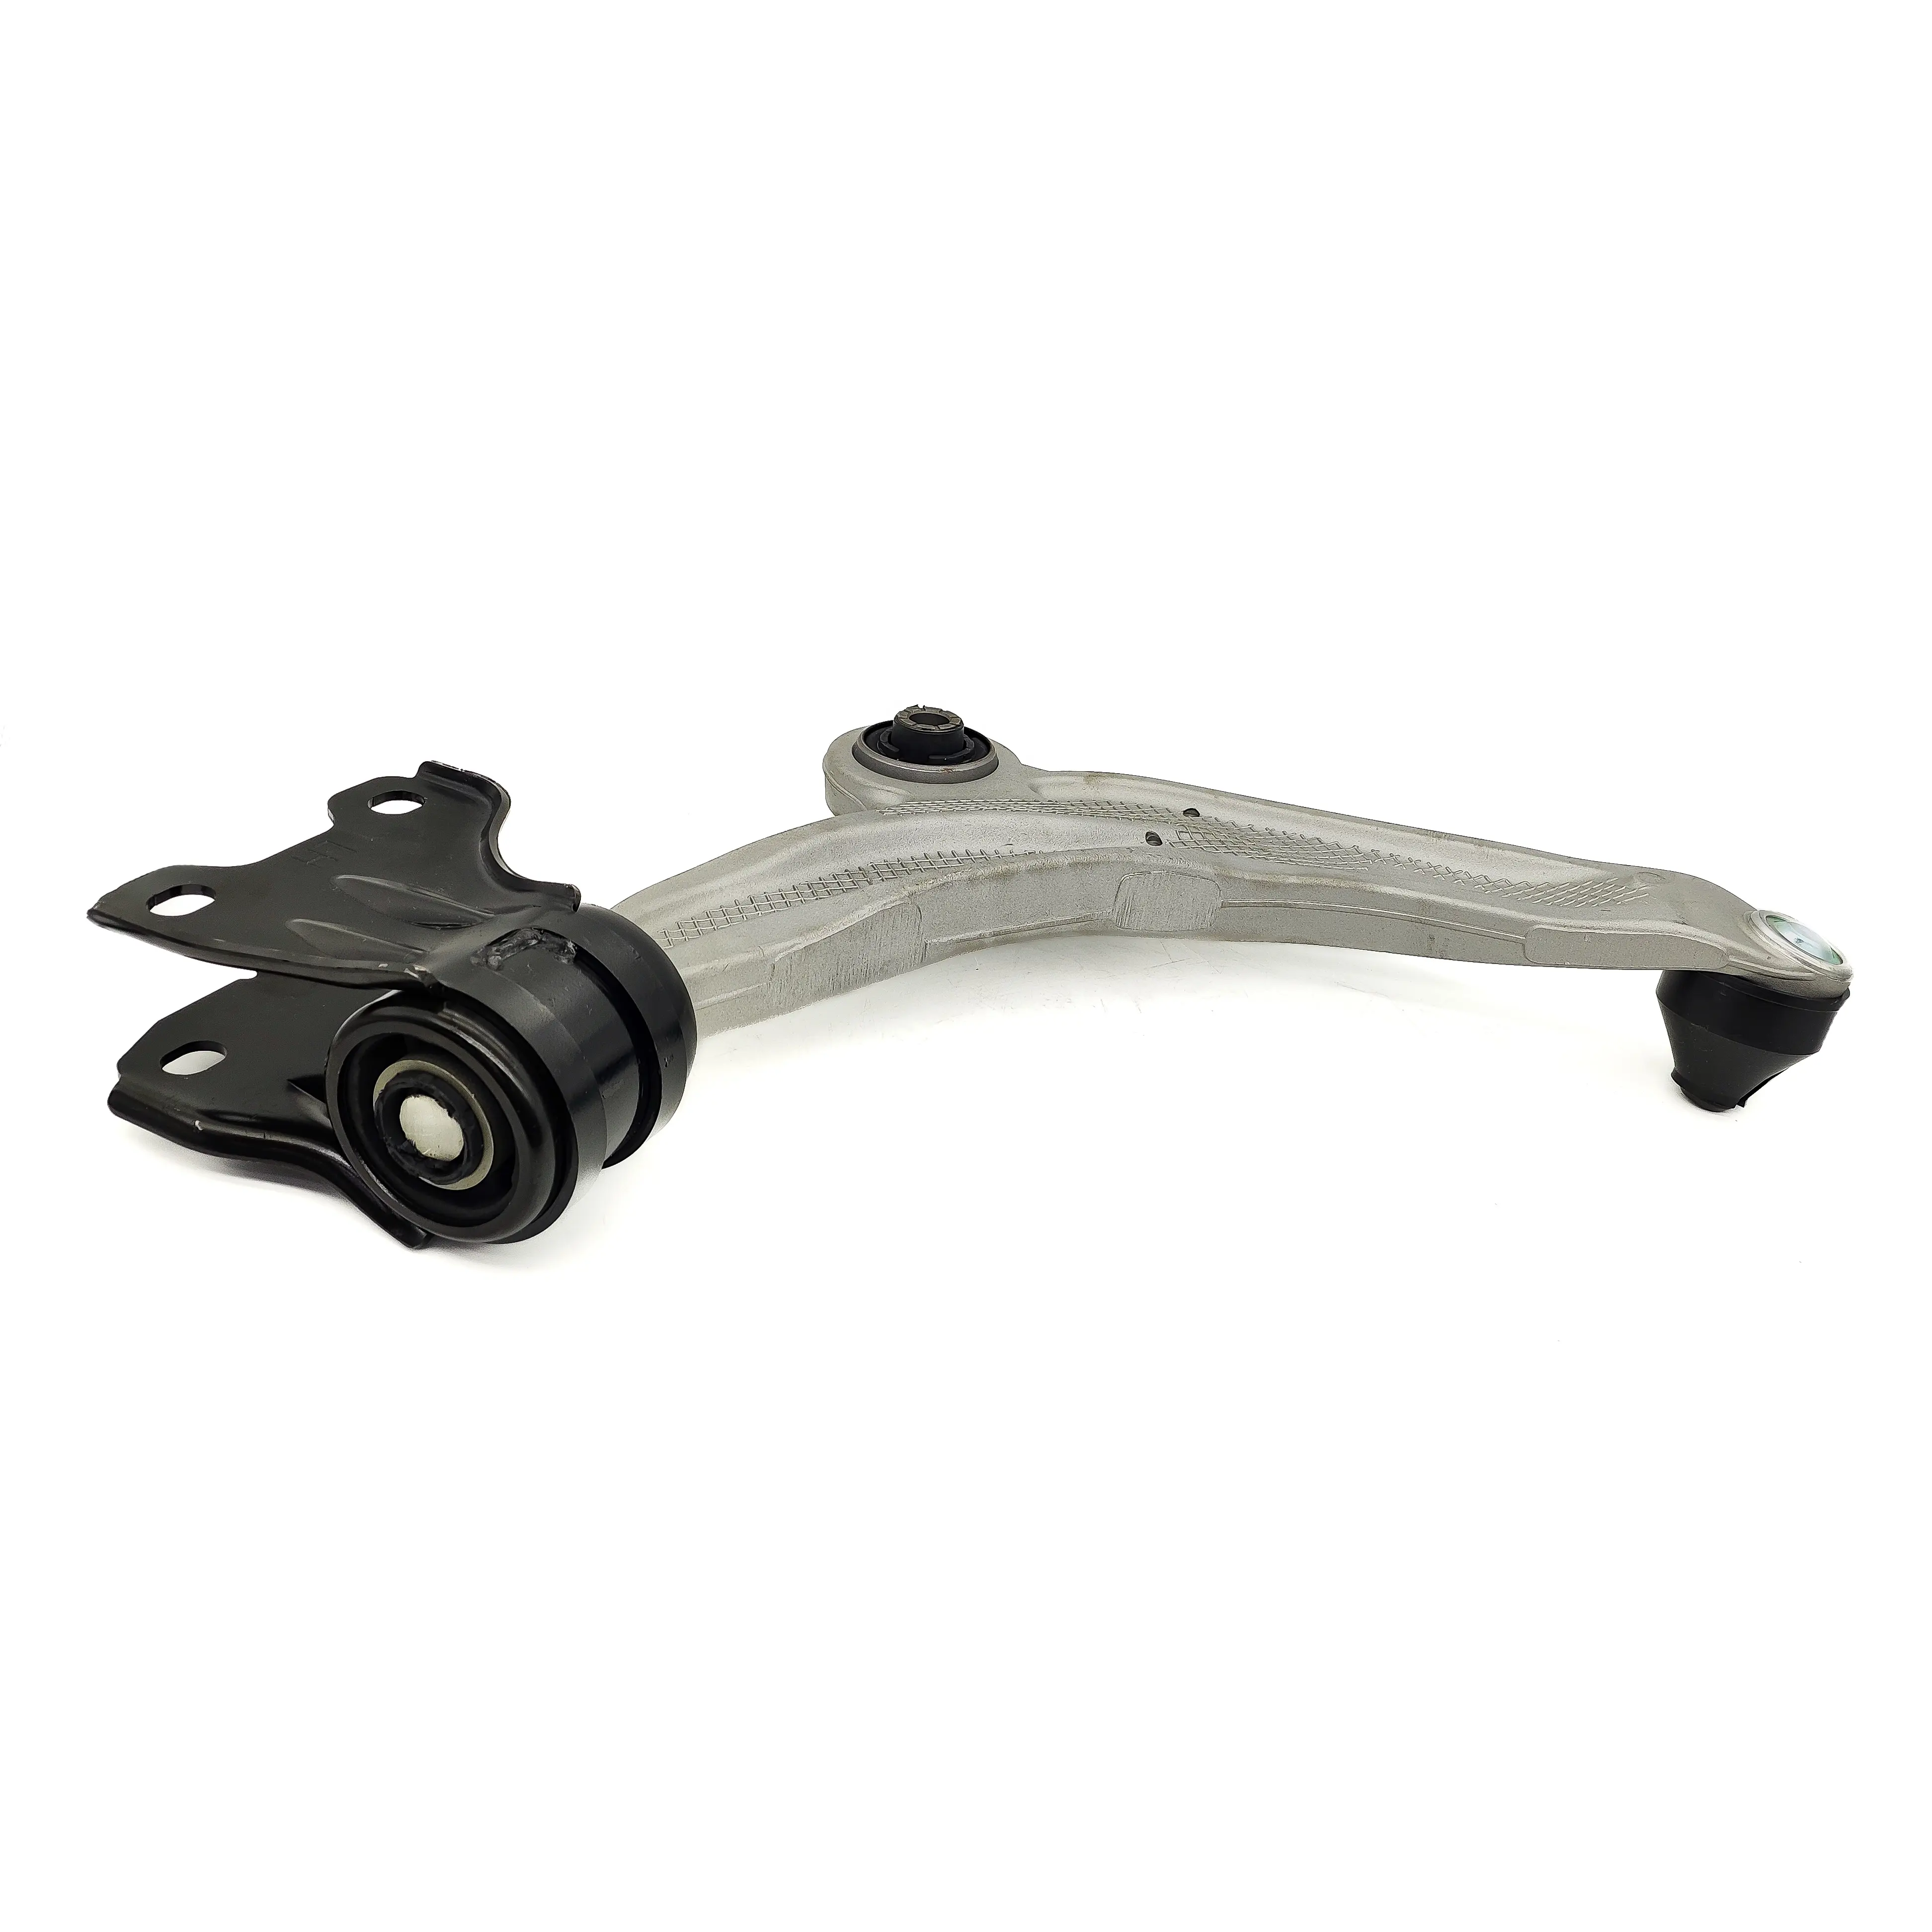 OEM F2GZ3079B Front Control Arm for Ford Edge, Lincoln MKX, Nautilus by HELLPER